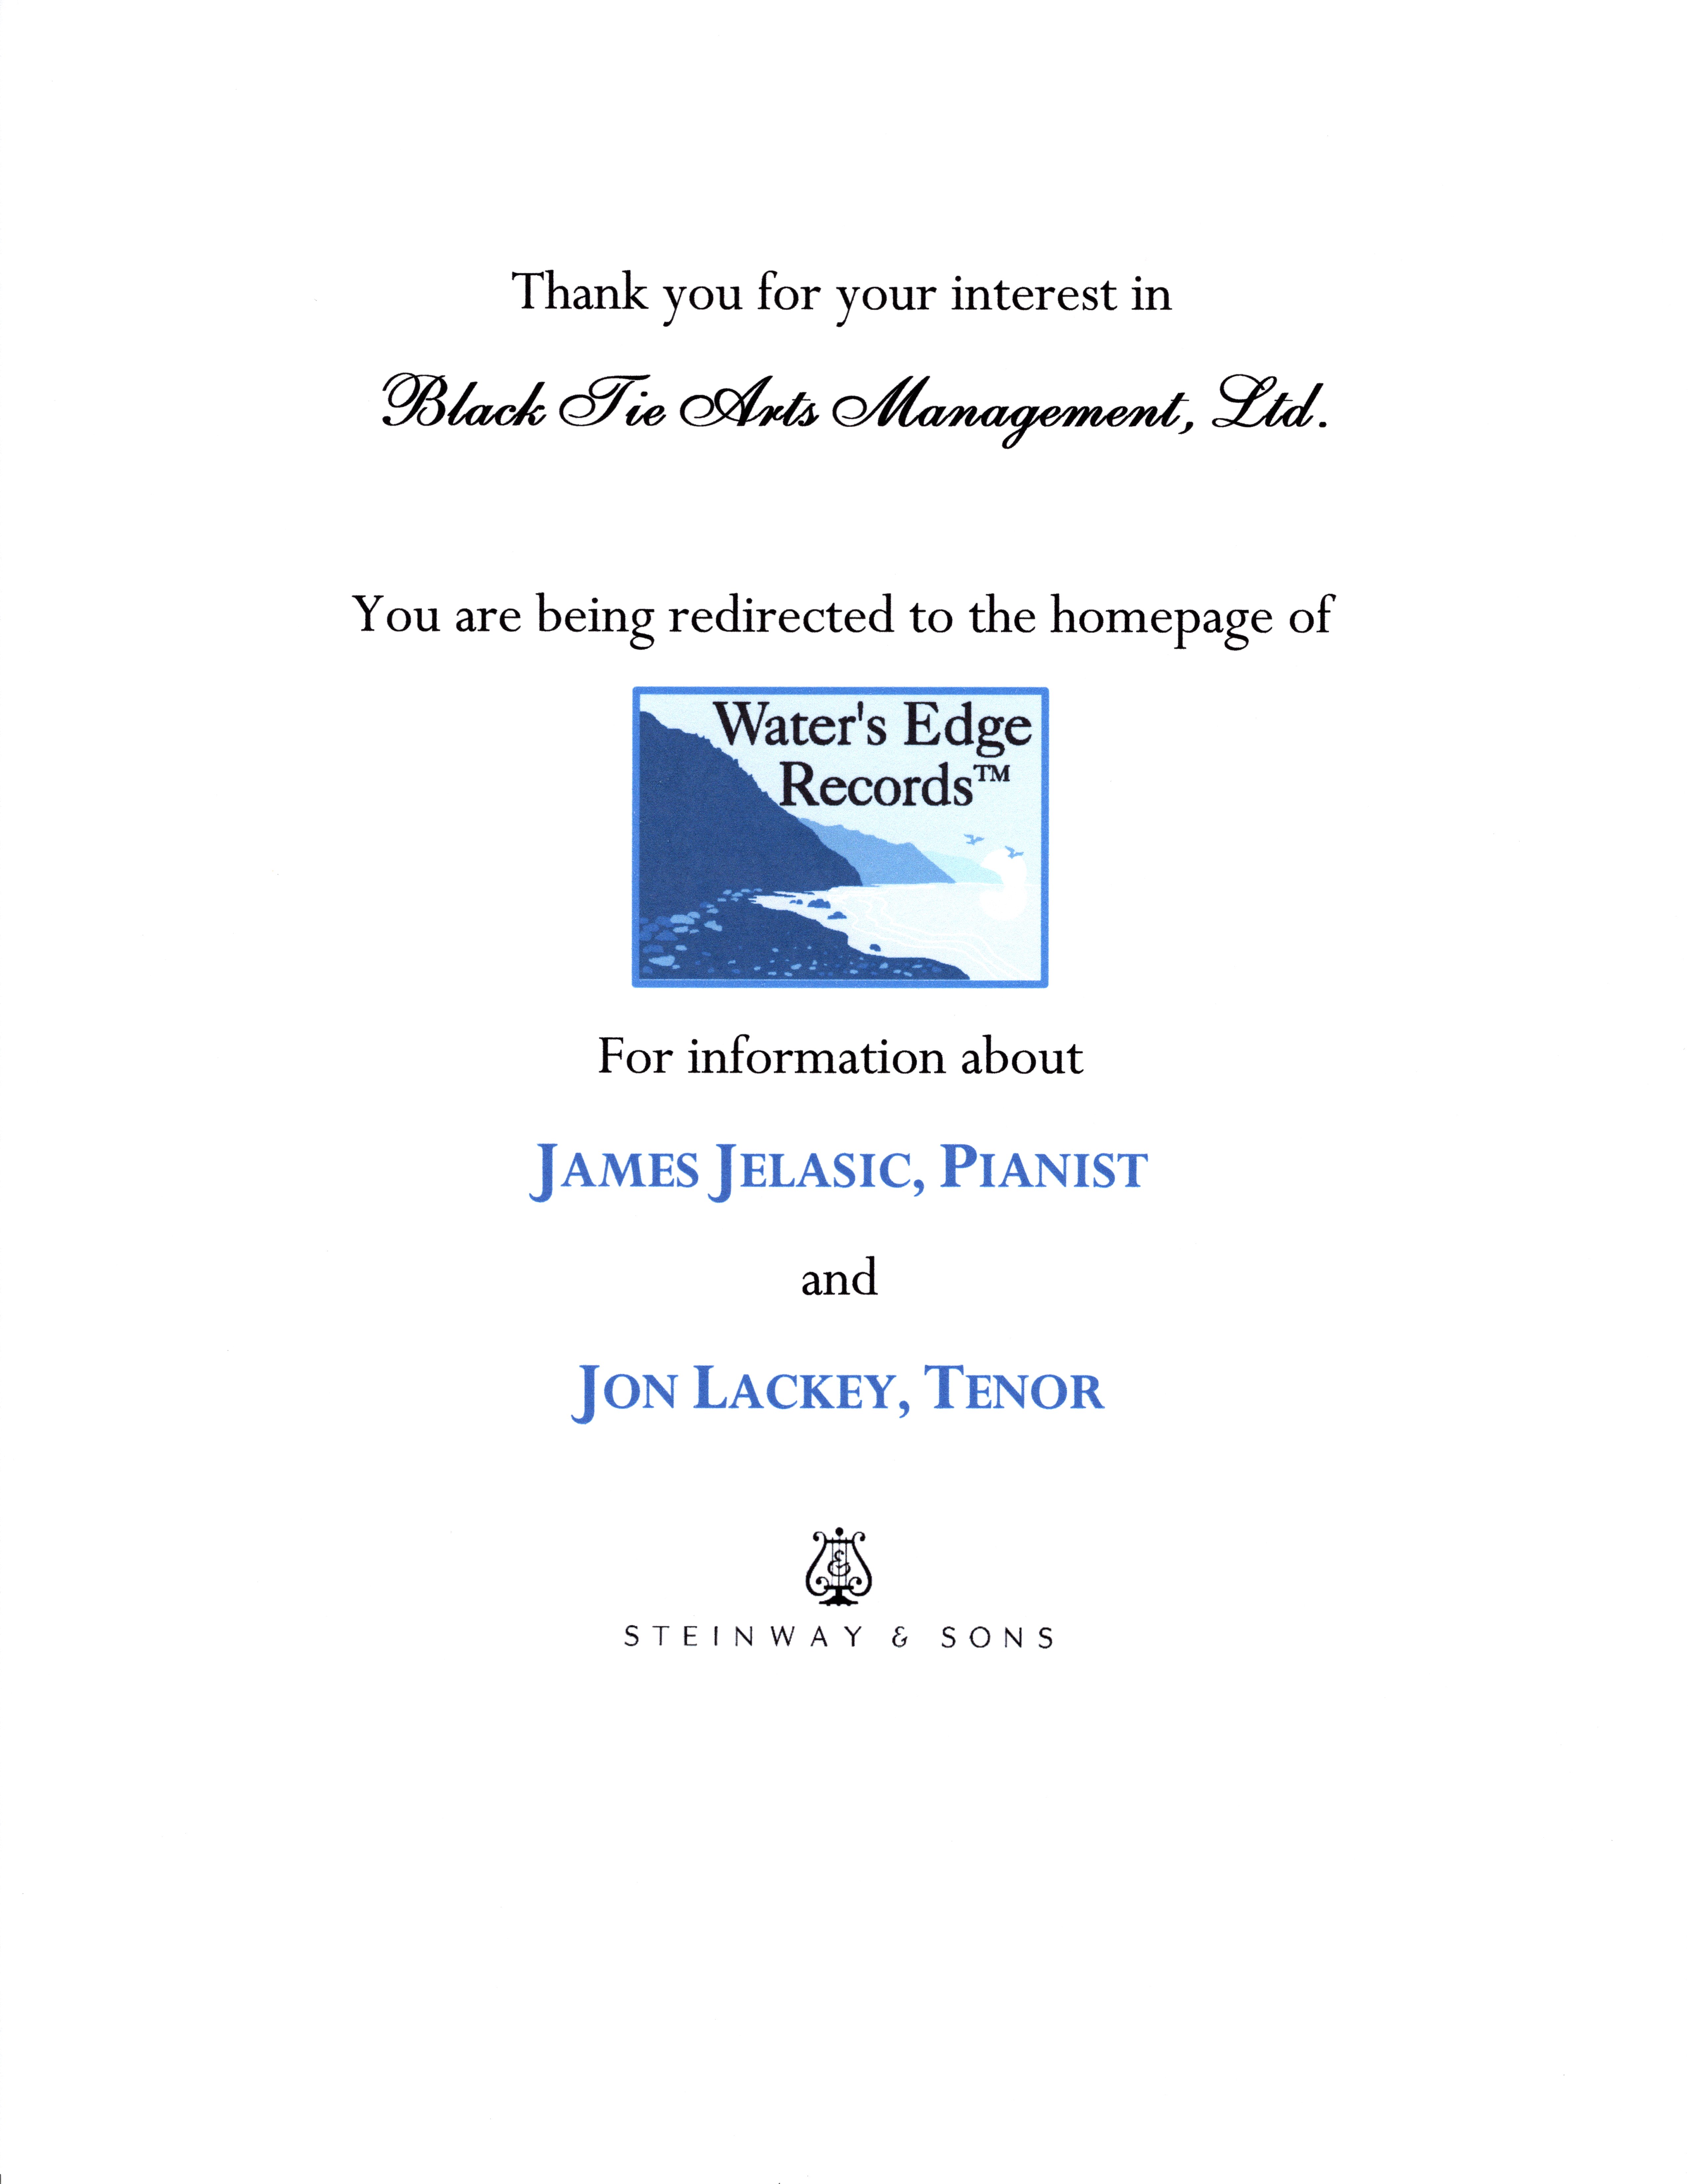 Thank you for your interest in Black Tie Arts Management, Ltd. You are being redirected to the homepage of Water’s Edge Records for information about James Jelasic, Pianist, and Jon Lackey, Tenor.